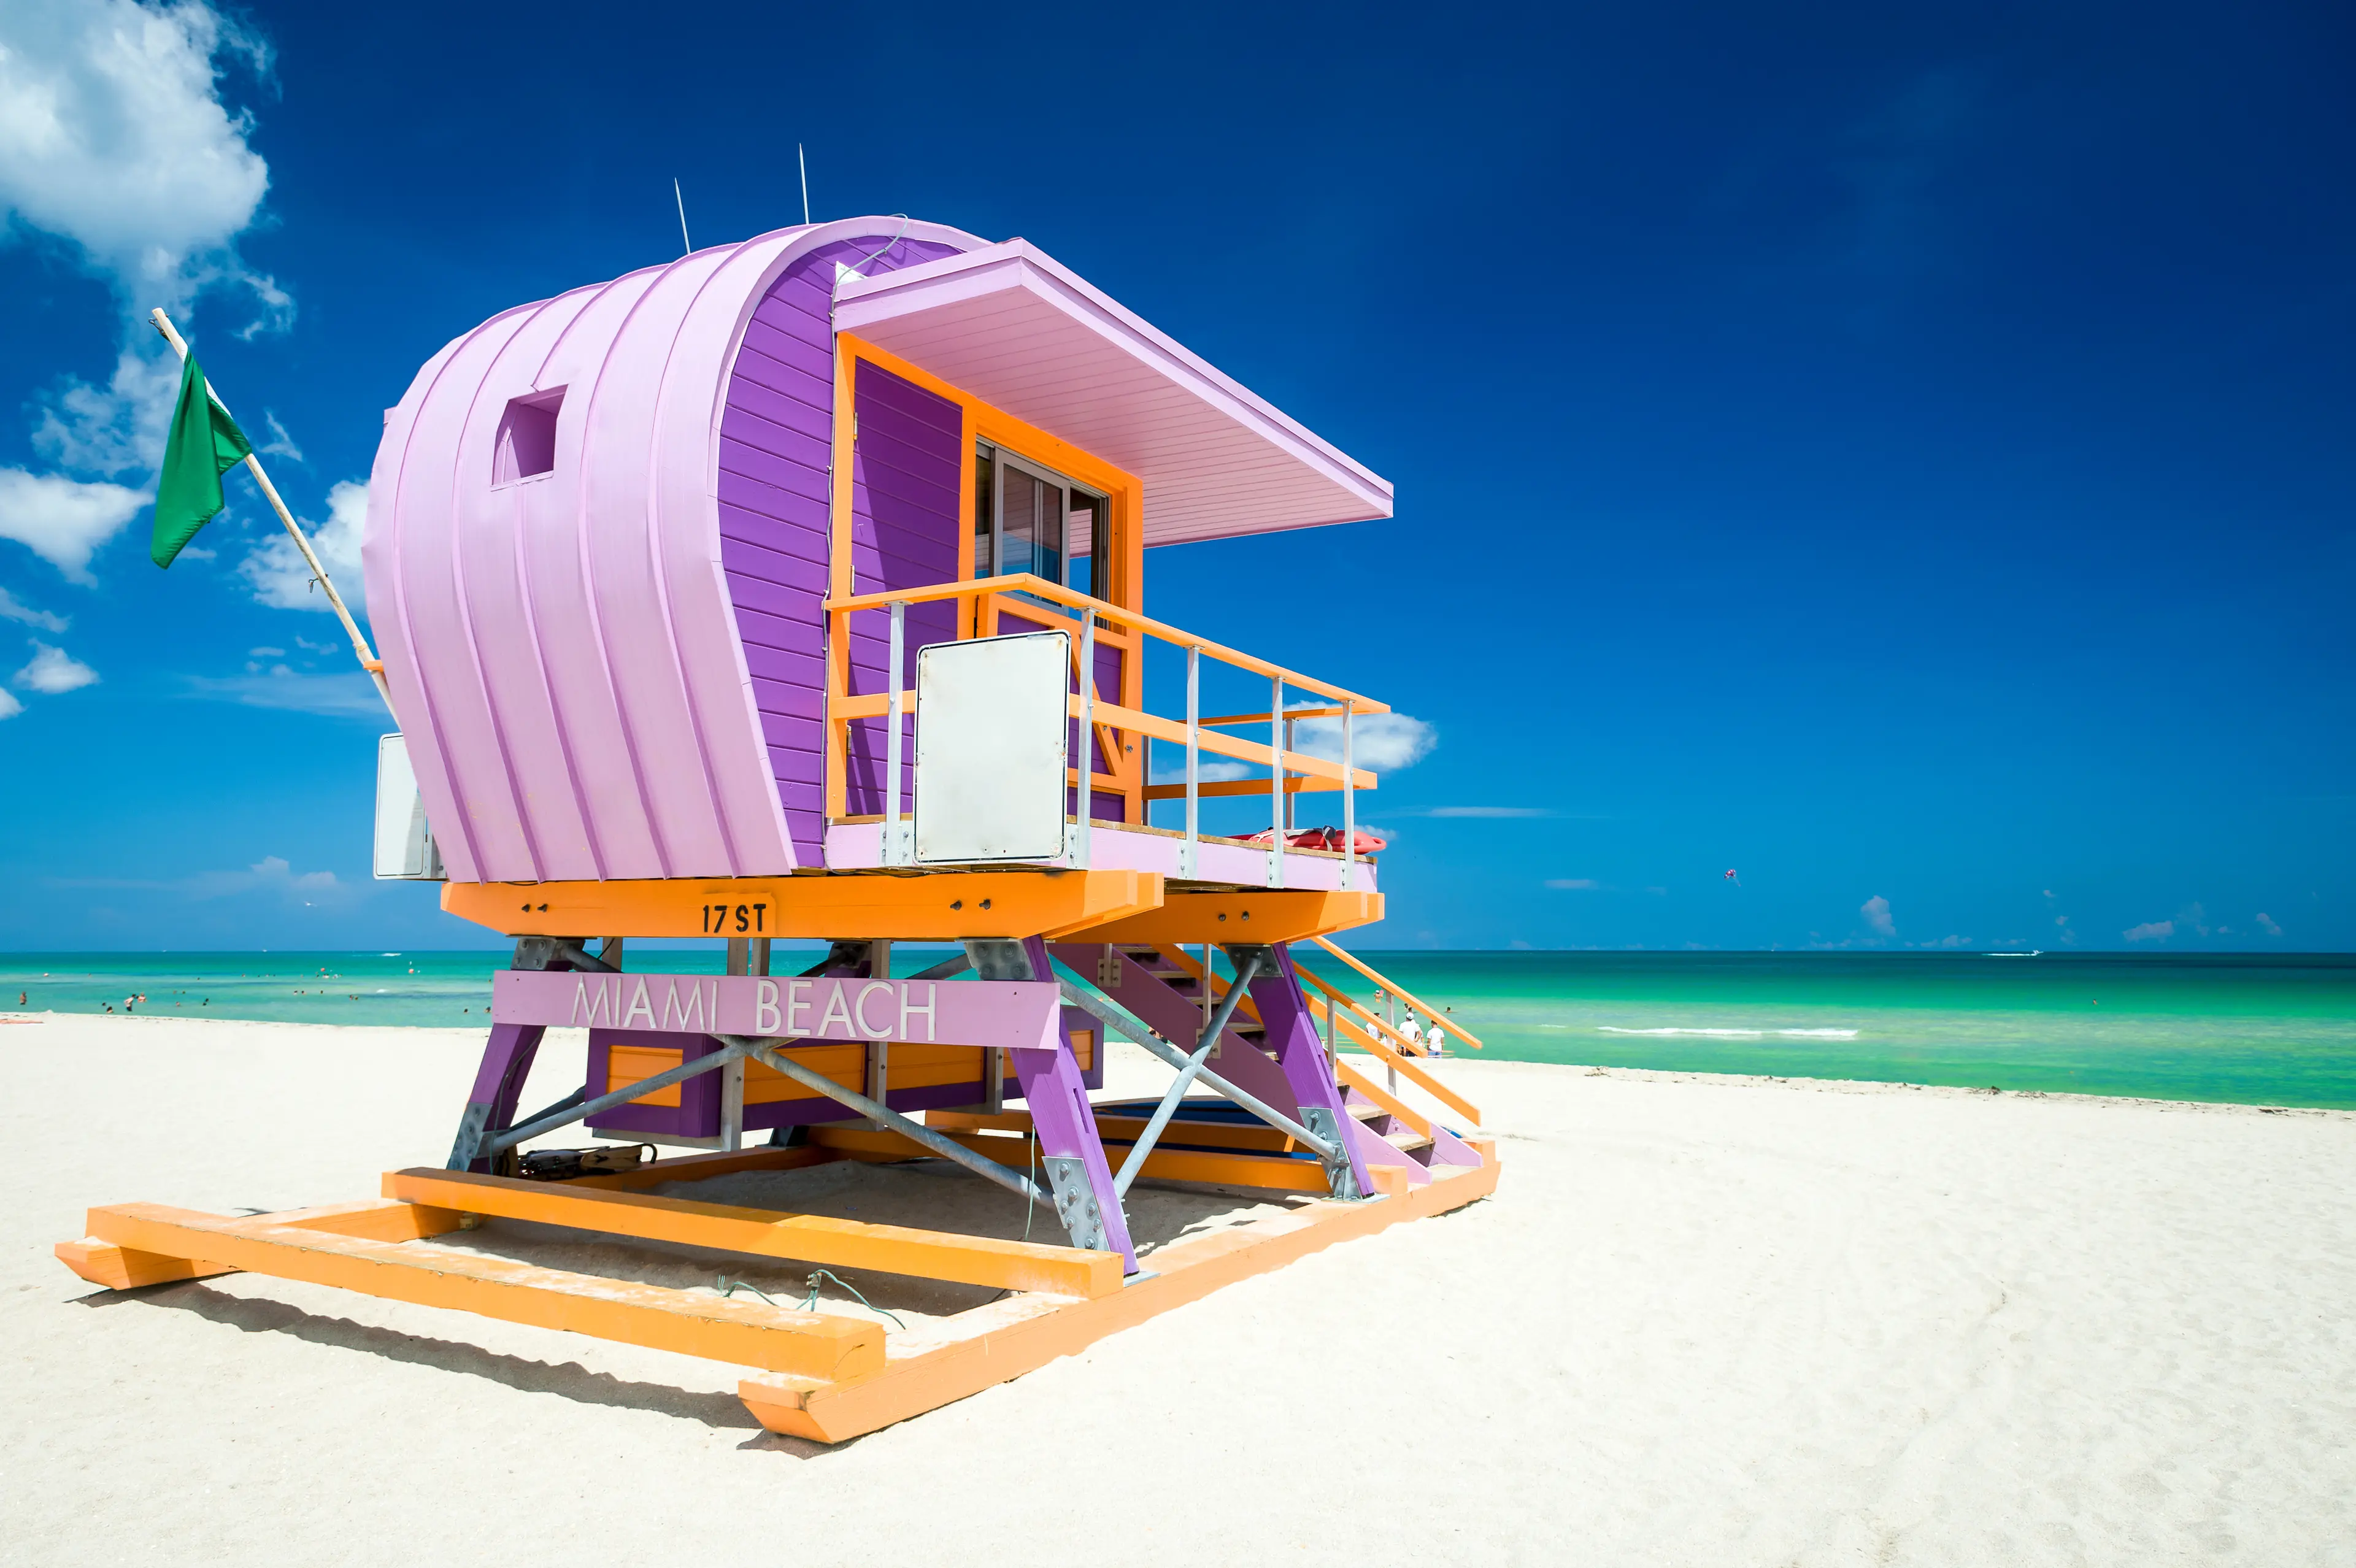 Lifeguard tower on South Beach